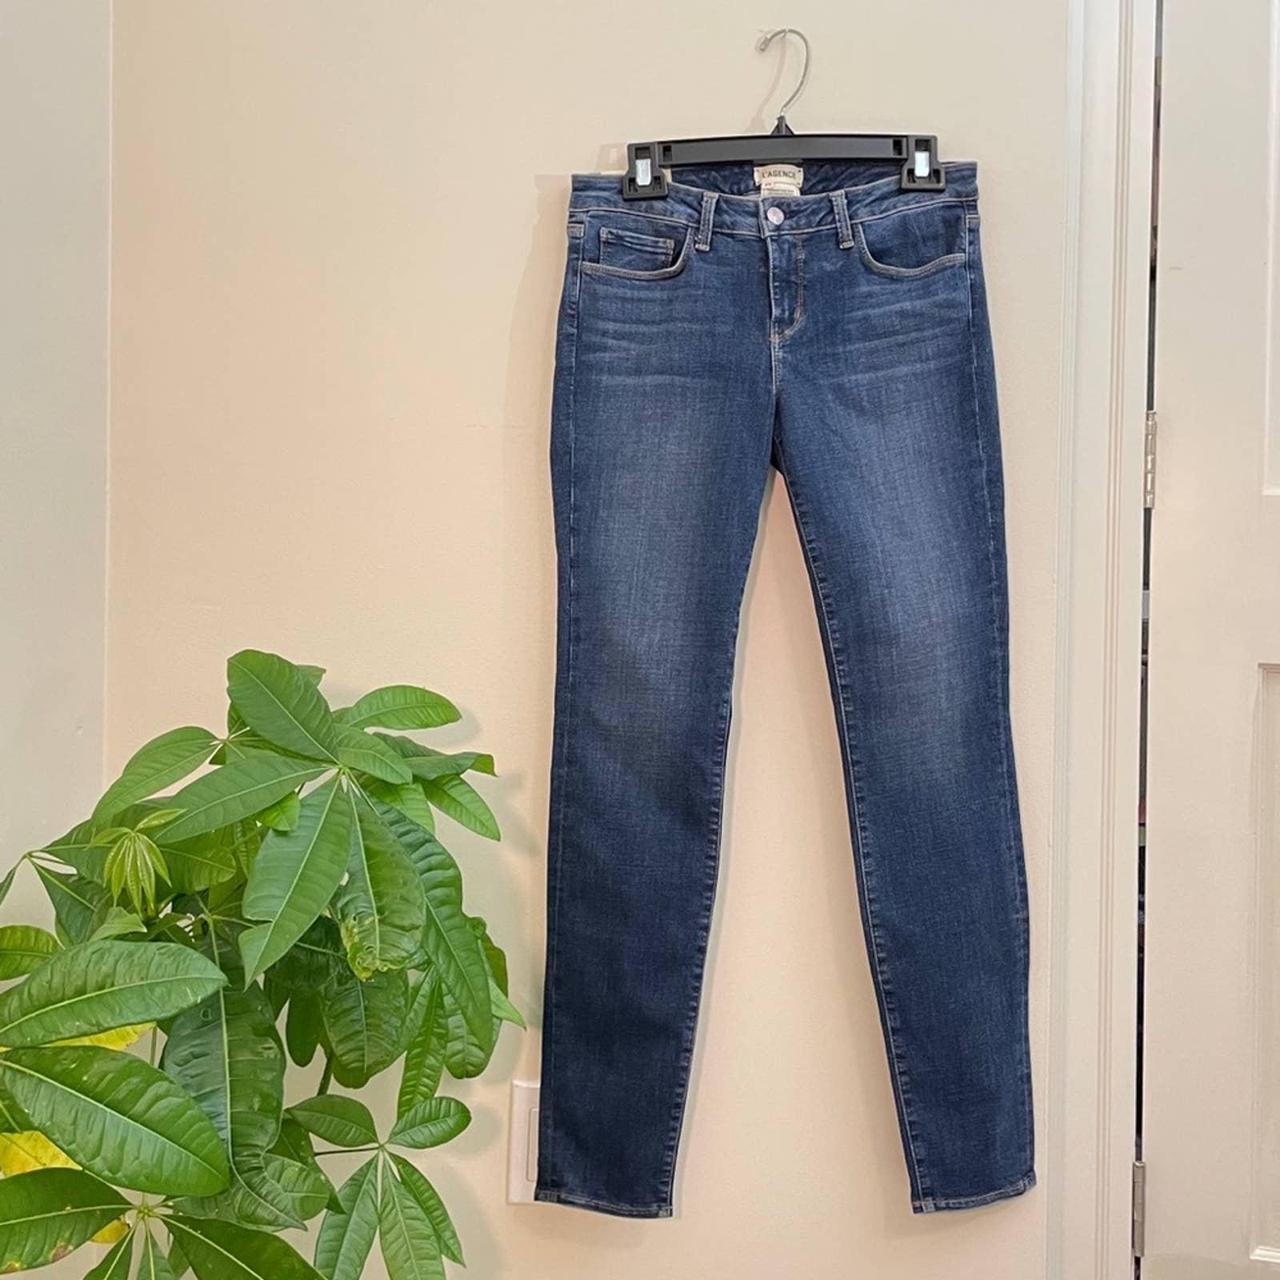 NWT L’AGENCE The Chantal Low Rise Skinny Jeans in... - Depop